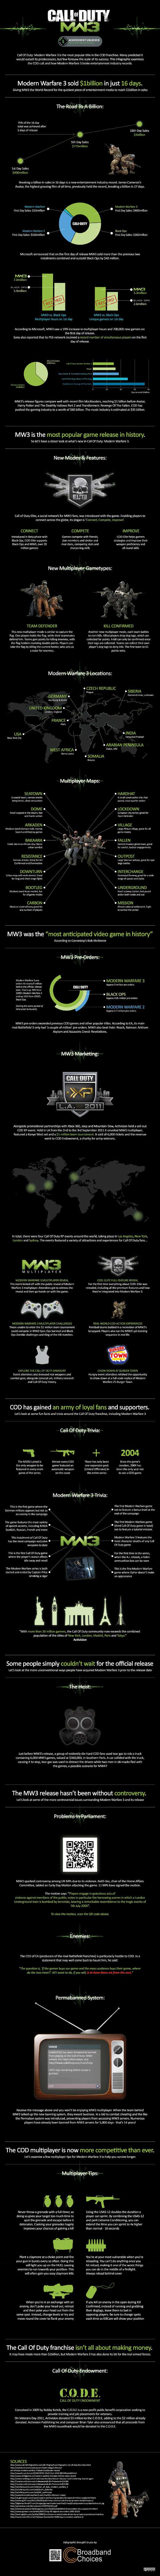 How MW3 Broke Entertainment Industry Records